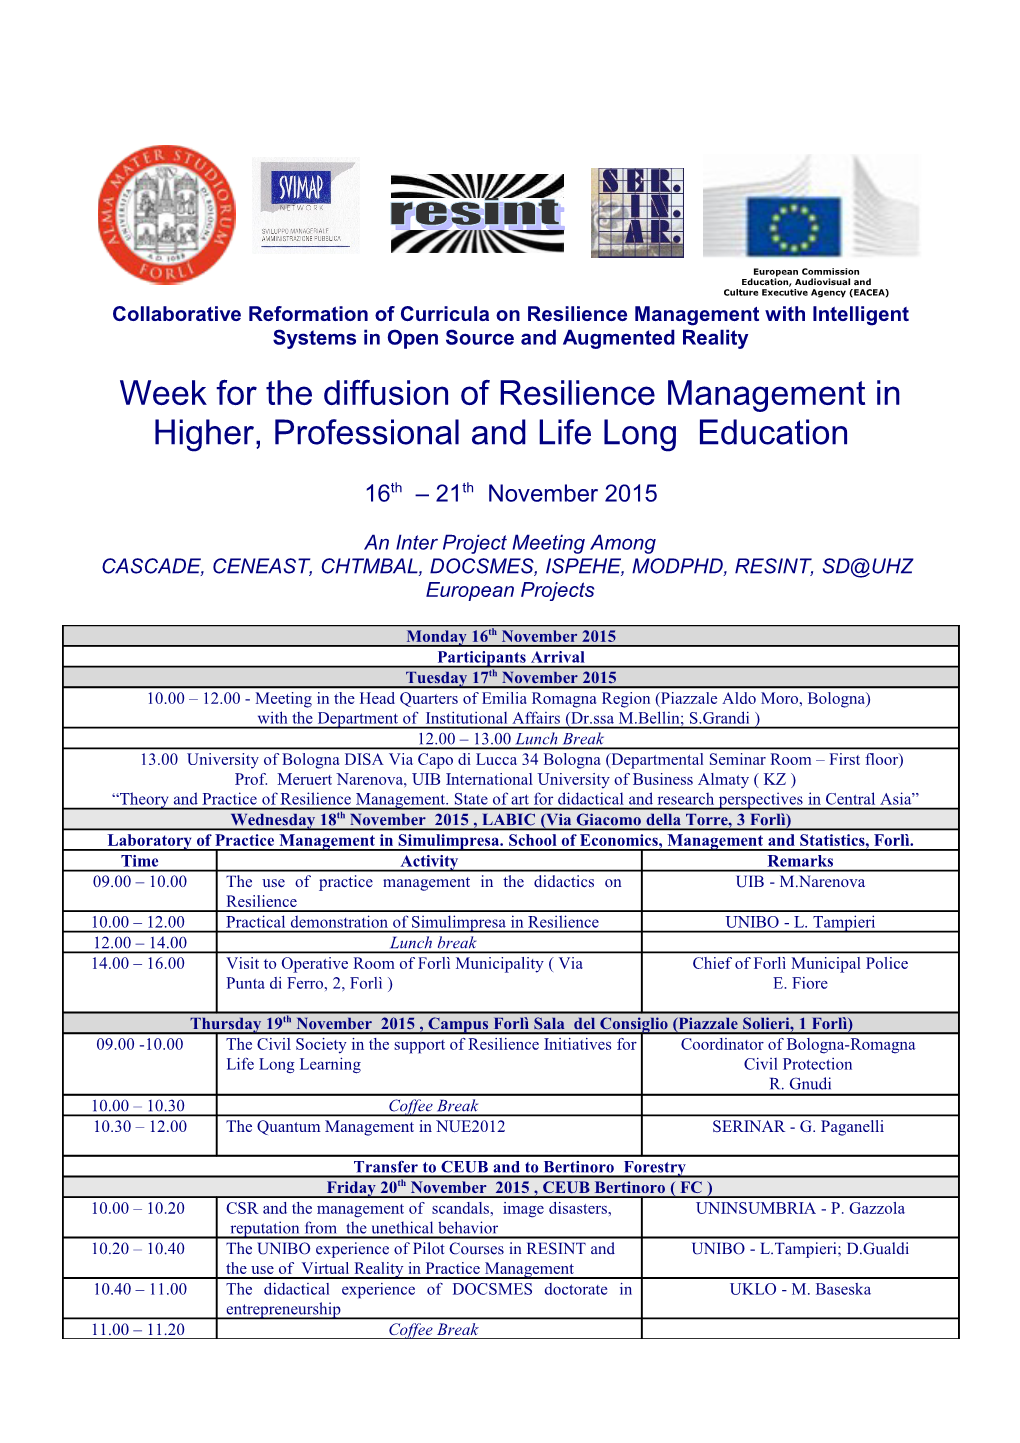 Collaborative Reformation of Curricula on Resilience Management with Intelligent Systems